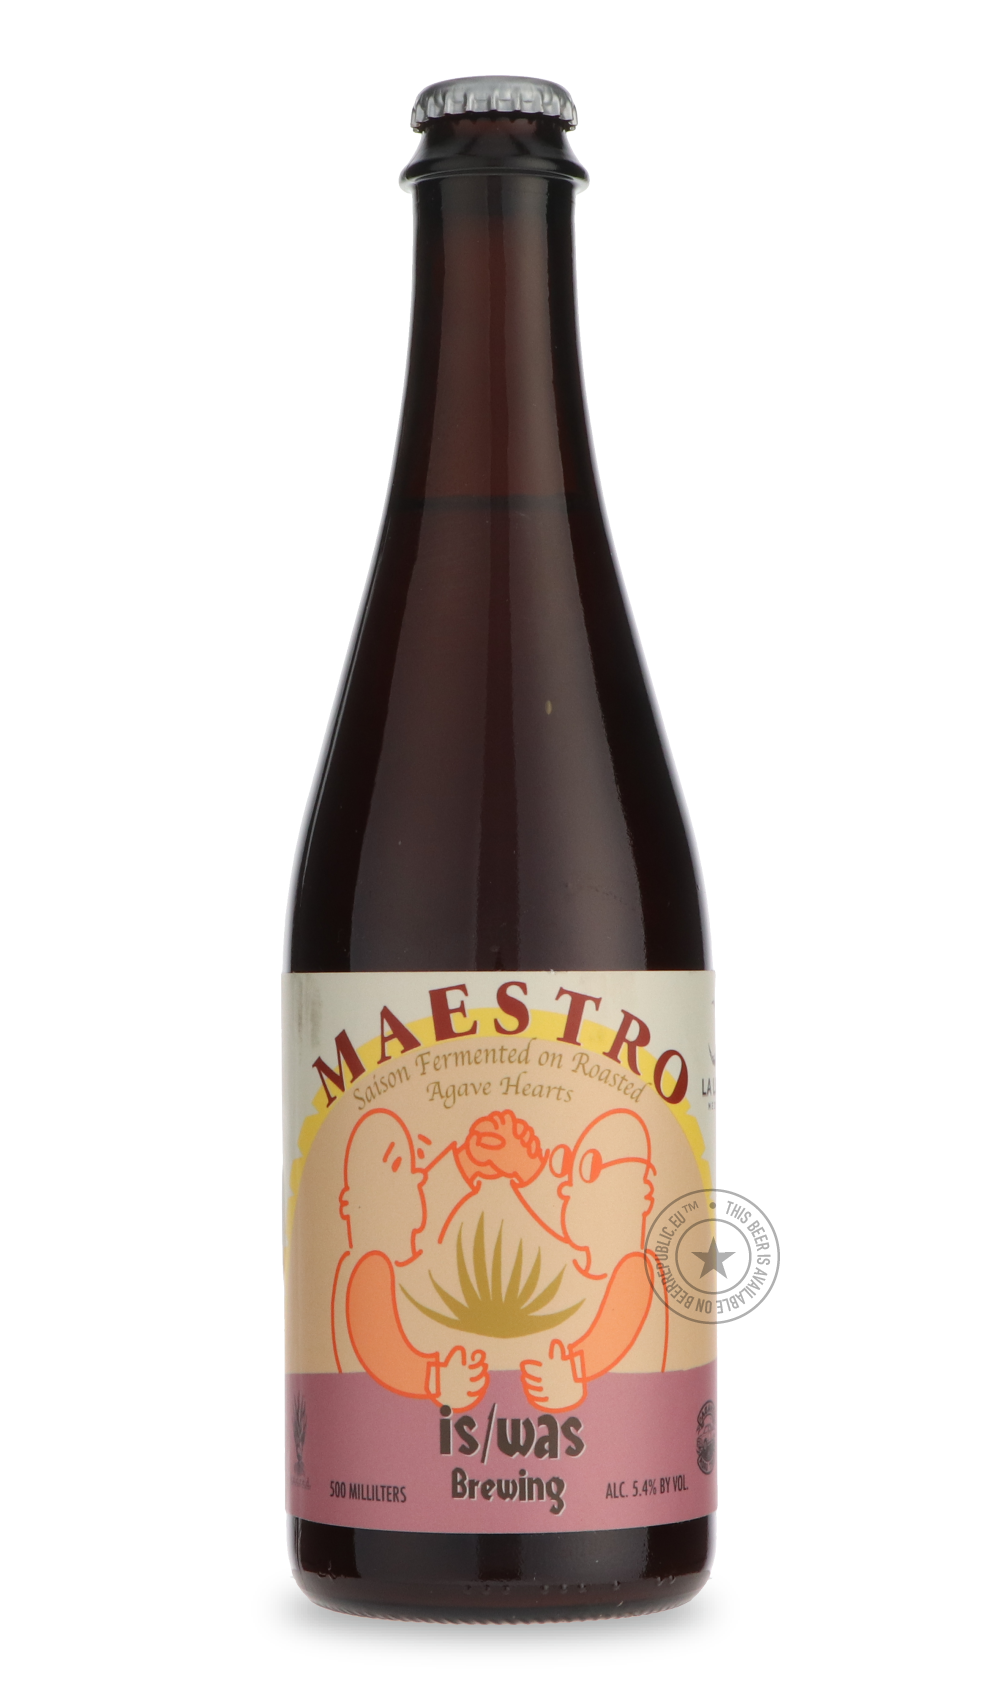 -is/was- Maestro 2021-Sour / Wild & Fruity- Only @ Beer Republic - The best online beer store for American & Canadian craft beer - Buy beer online from the USA and Canada - Bier online kopen - Amerikaans bier kopen - Craft beer store - Craft beer kopen - Amerikanisch bier kaufen - Bier online kaufen - Acheter biere online - IPA - Stout - Porter - New England IPA - Hazy IPA - Imperial Stout - Barrel Aged - Barrel Aged Imperial Stout - Brown - Dark beer - Blond - Blonde - Pilsner - Lager - Wheat - Weizen - Am